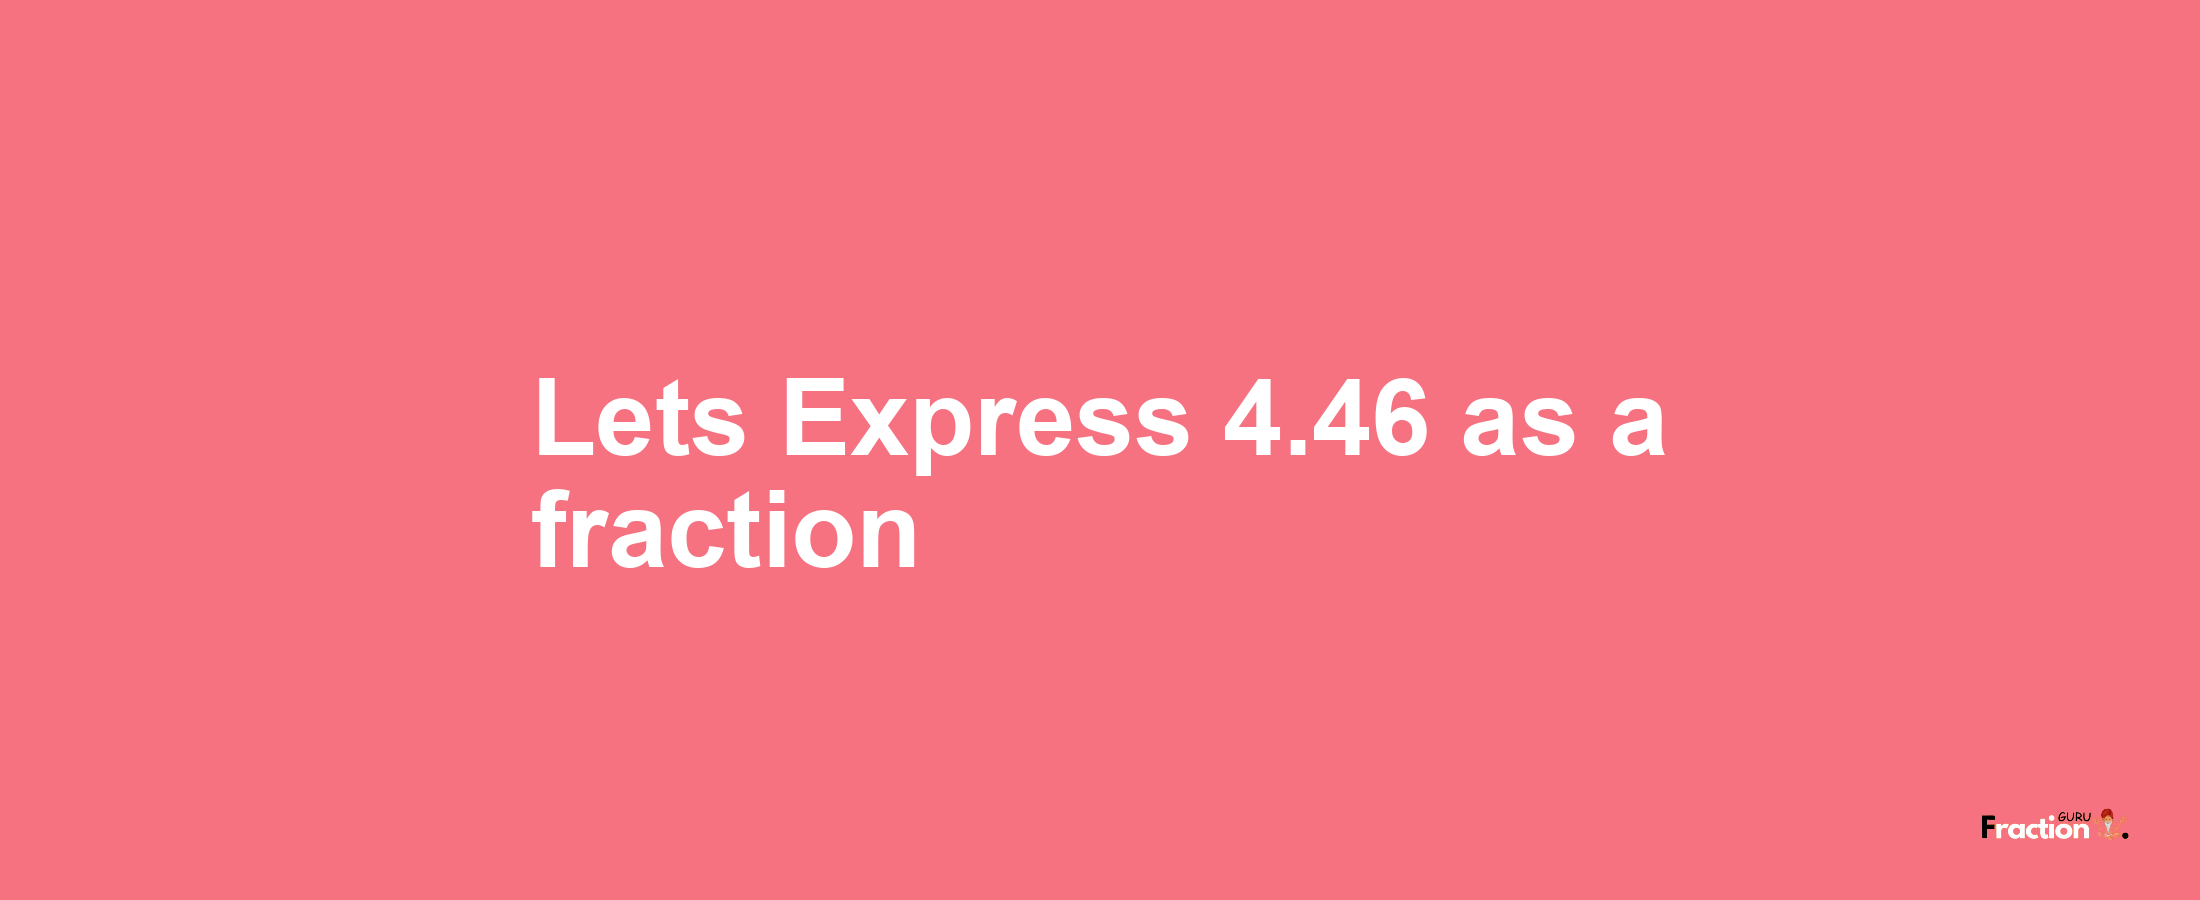 Lets Express 4.46 as afraction